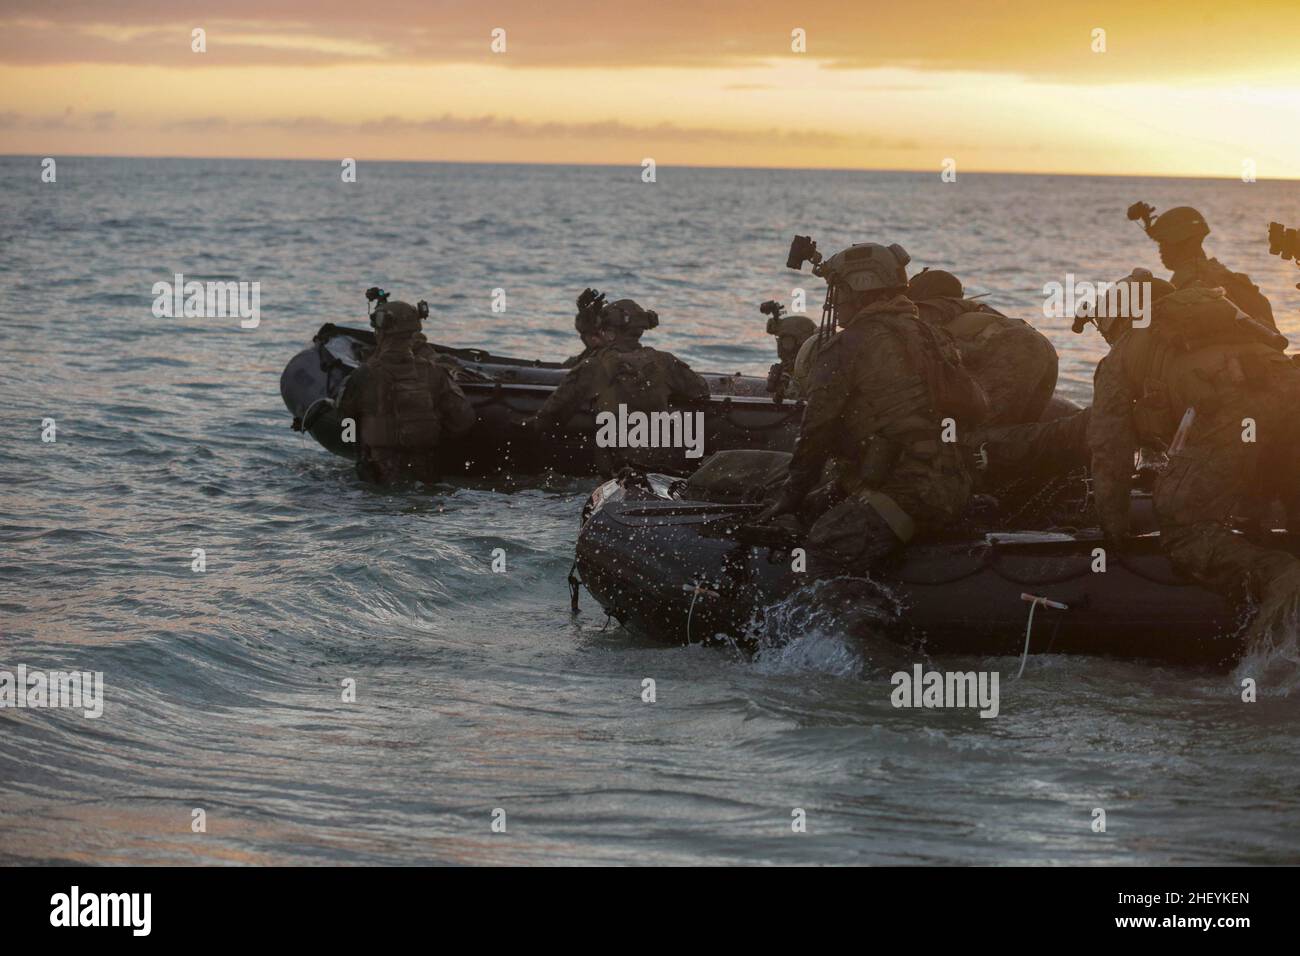 Ewa Beach, Hawaii, USA. 8th Jan, 2022. U.S. Marines with the 31st Marine Expeditionary Unit (MEU) launch combat rubber raiding crafts during a bottom-up visit, board, search, and seizure mission to intercept sensitive equipment during Realistic Urban Training Exercise 22.1 (RUTEX) at Joint Base Pearl Harbor-Hickam, Hawaii, Jan 8, 2022. The purpose of the RUTEX is to incorporate the specialized individual and small-unit skills of the MEU and conduct high-intensity, advanced, and complex Marine Air-Ground Task Force operations to prepare MEUs and other designated forces to support the geogra Stock Photo